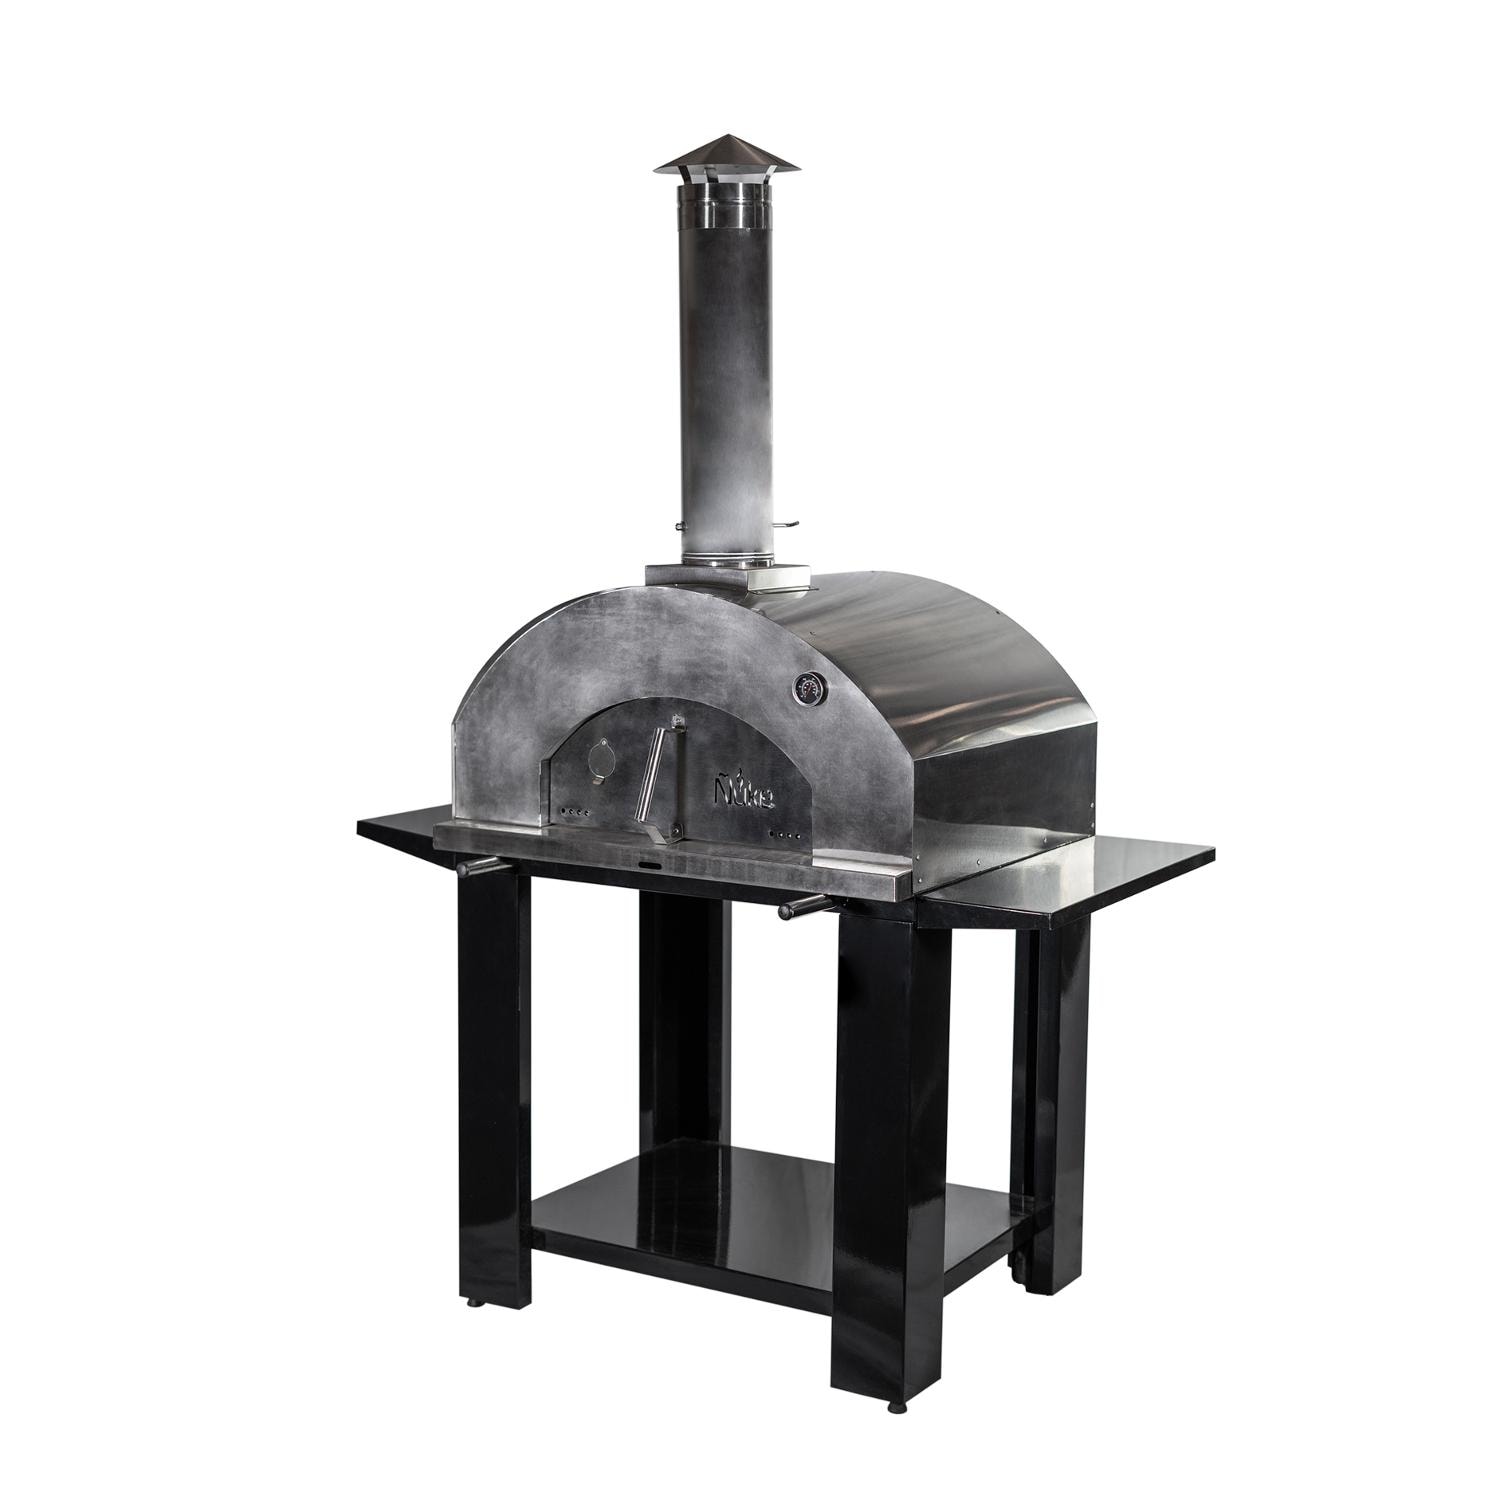 Nuke 31 Inch Outdoor Wood Fired Stainless Steel Freestanding Pizza Cooking Oven - image 2 of 6